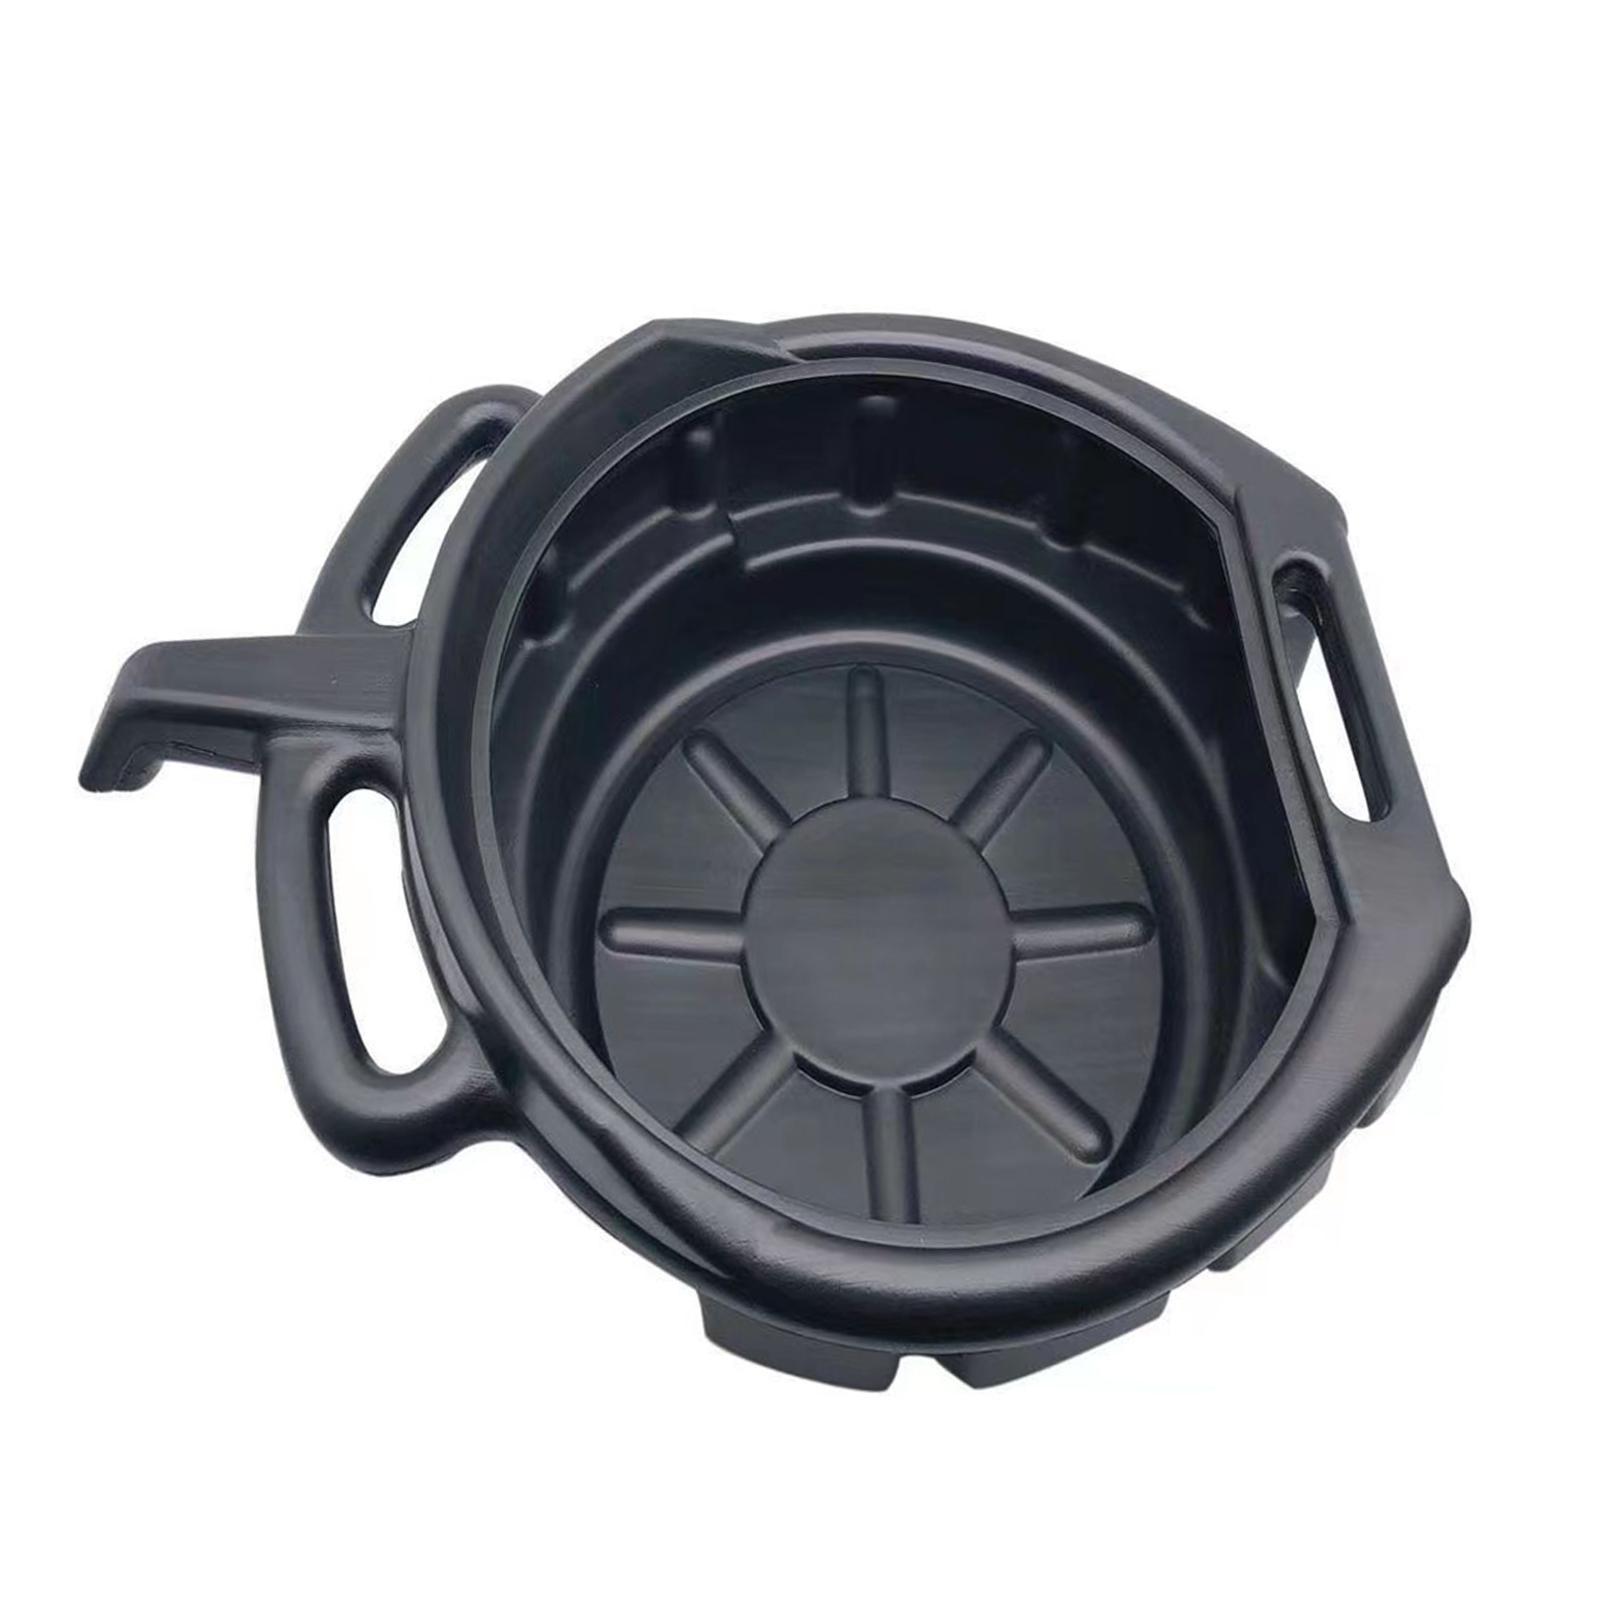 Oil Fuel Coolant Can Tray PP Portable Leak 10L Easy to Use Gearbox Car Accesories Drain Pan for Car Fuel Fluid Workshop Truck